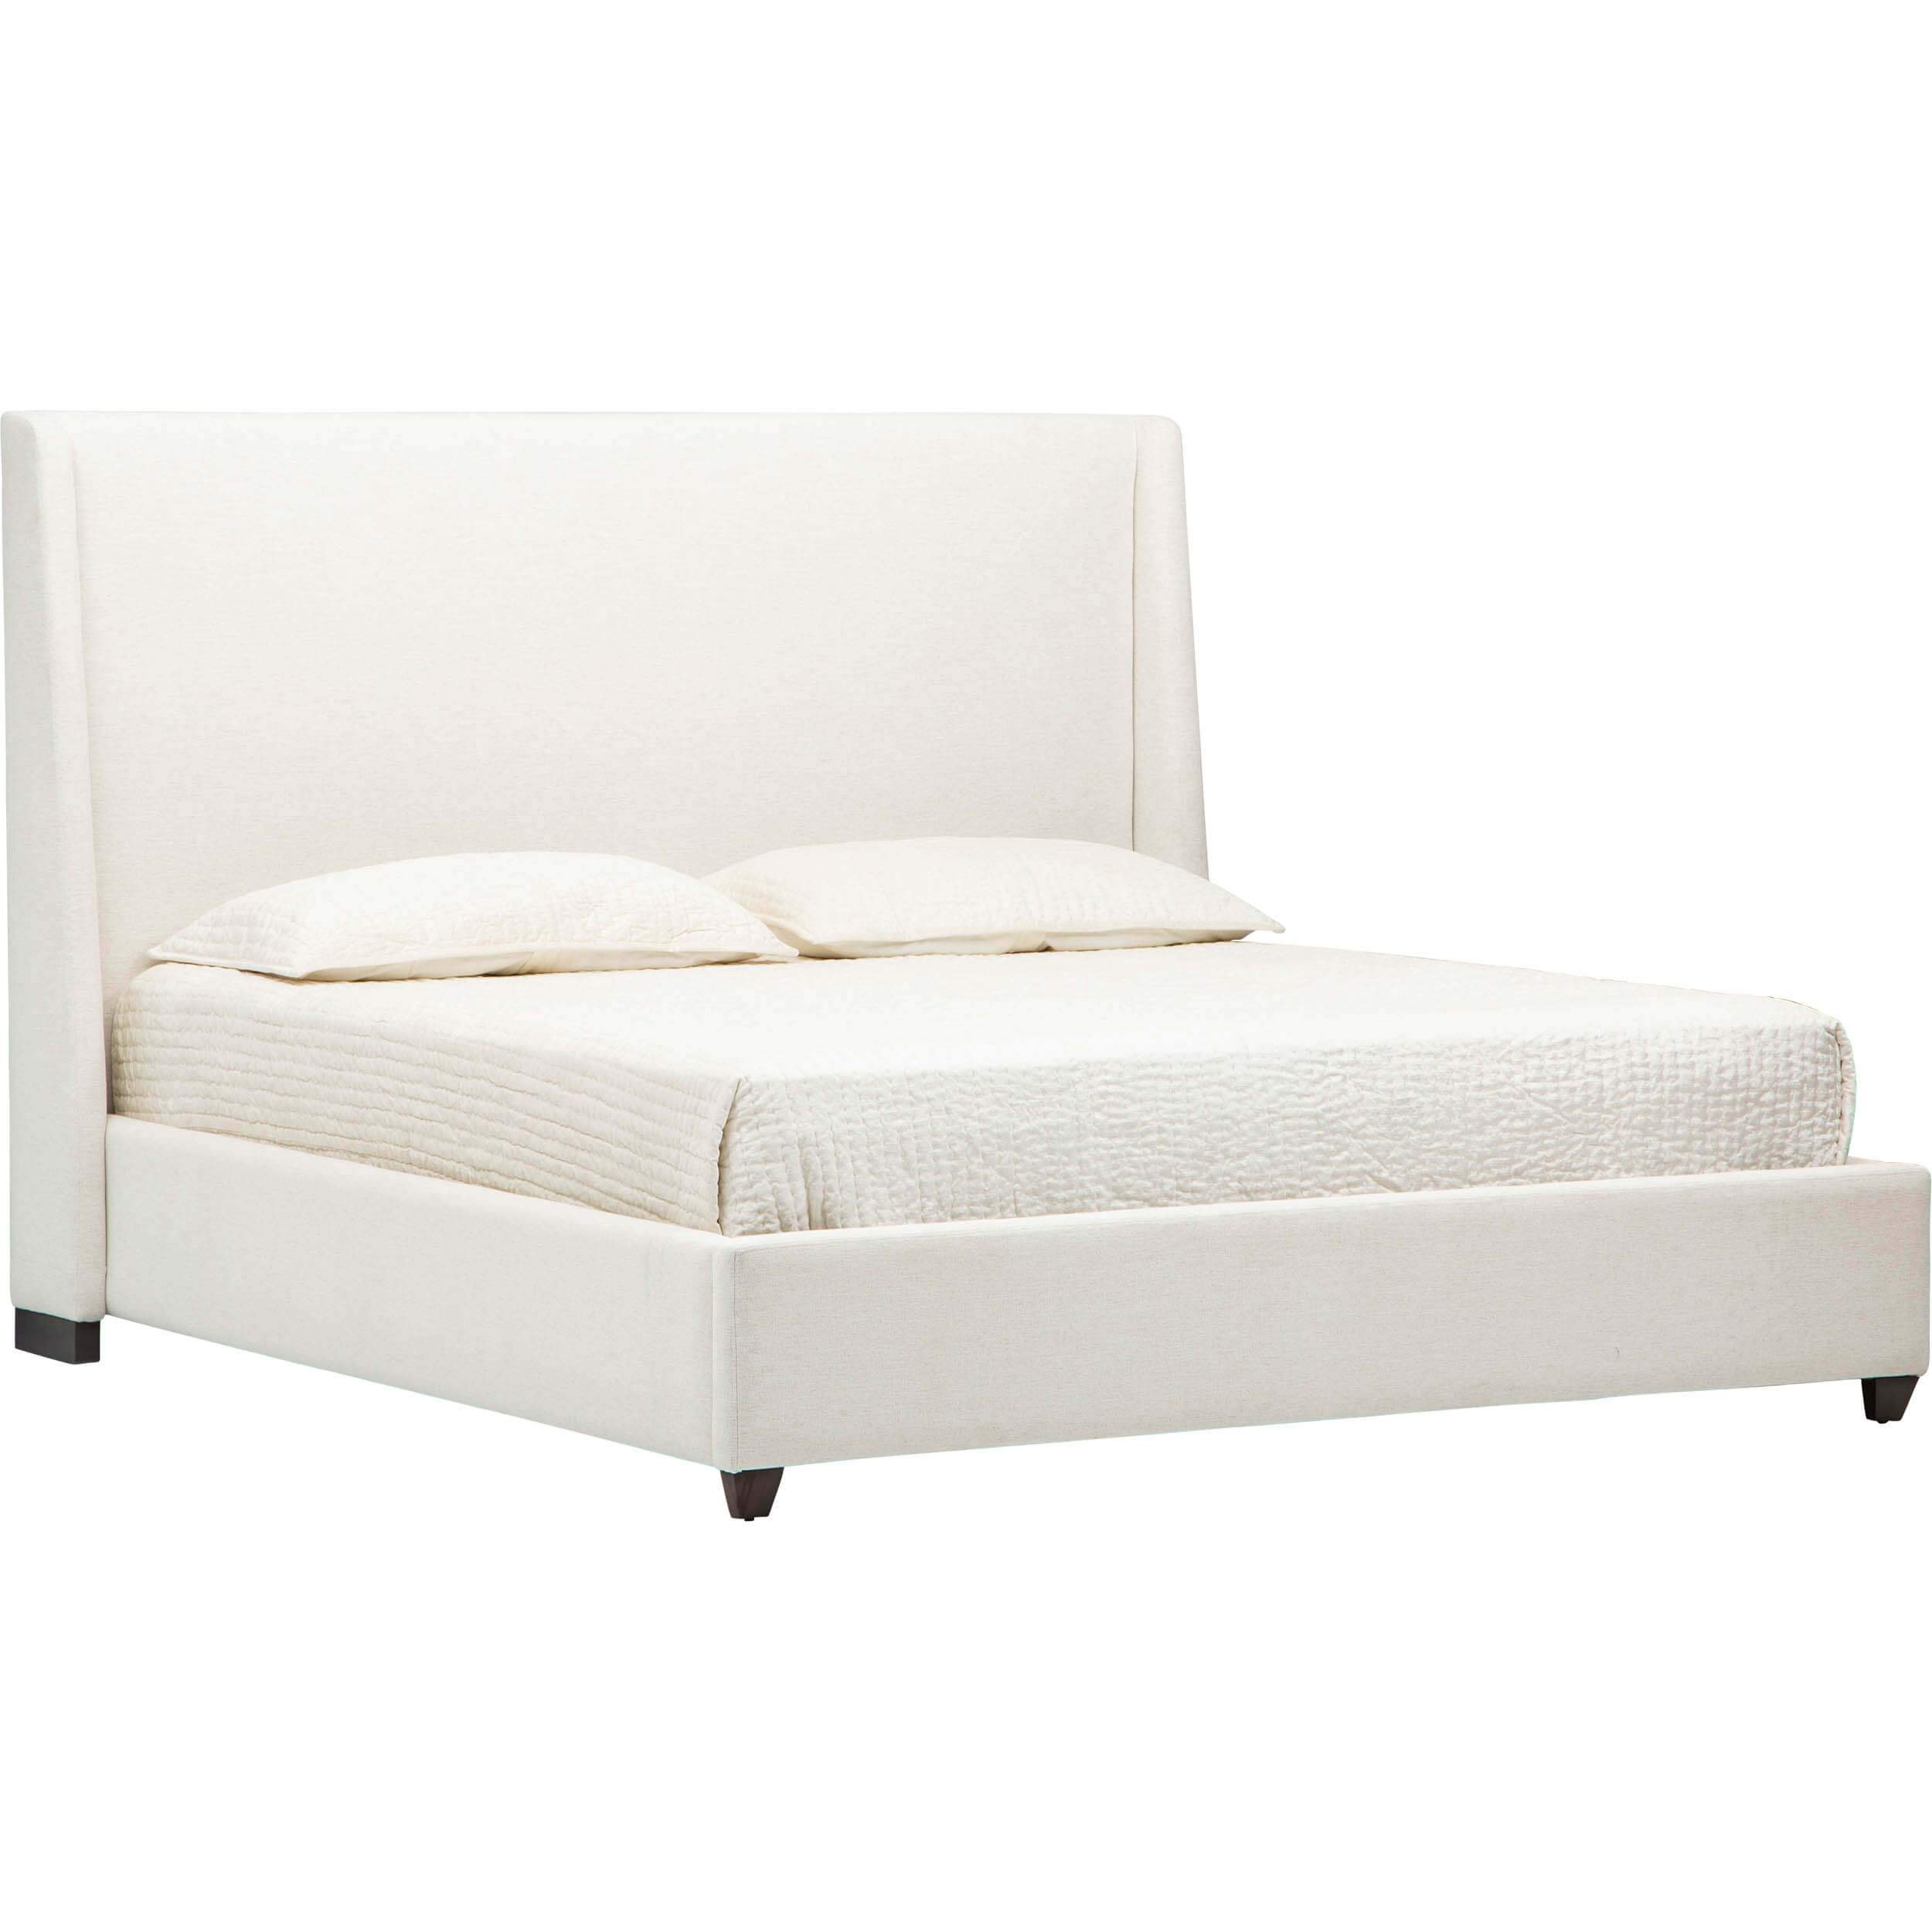 Image of Emma Bed, Nomad Snow